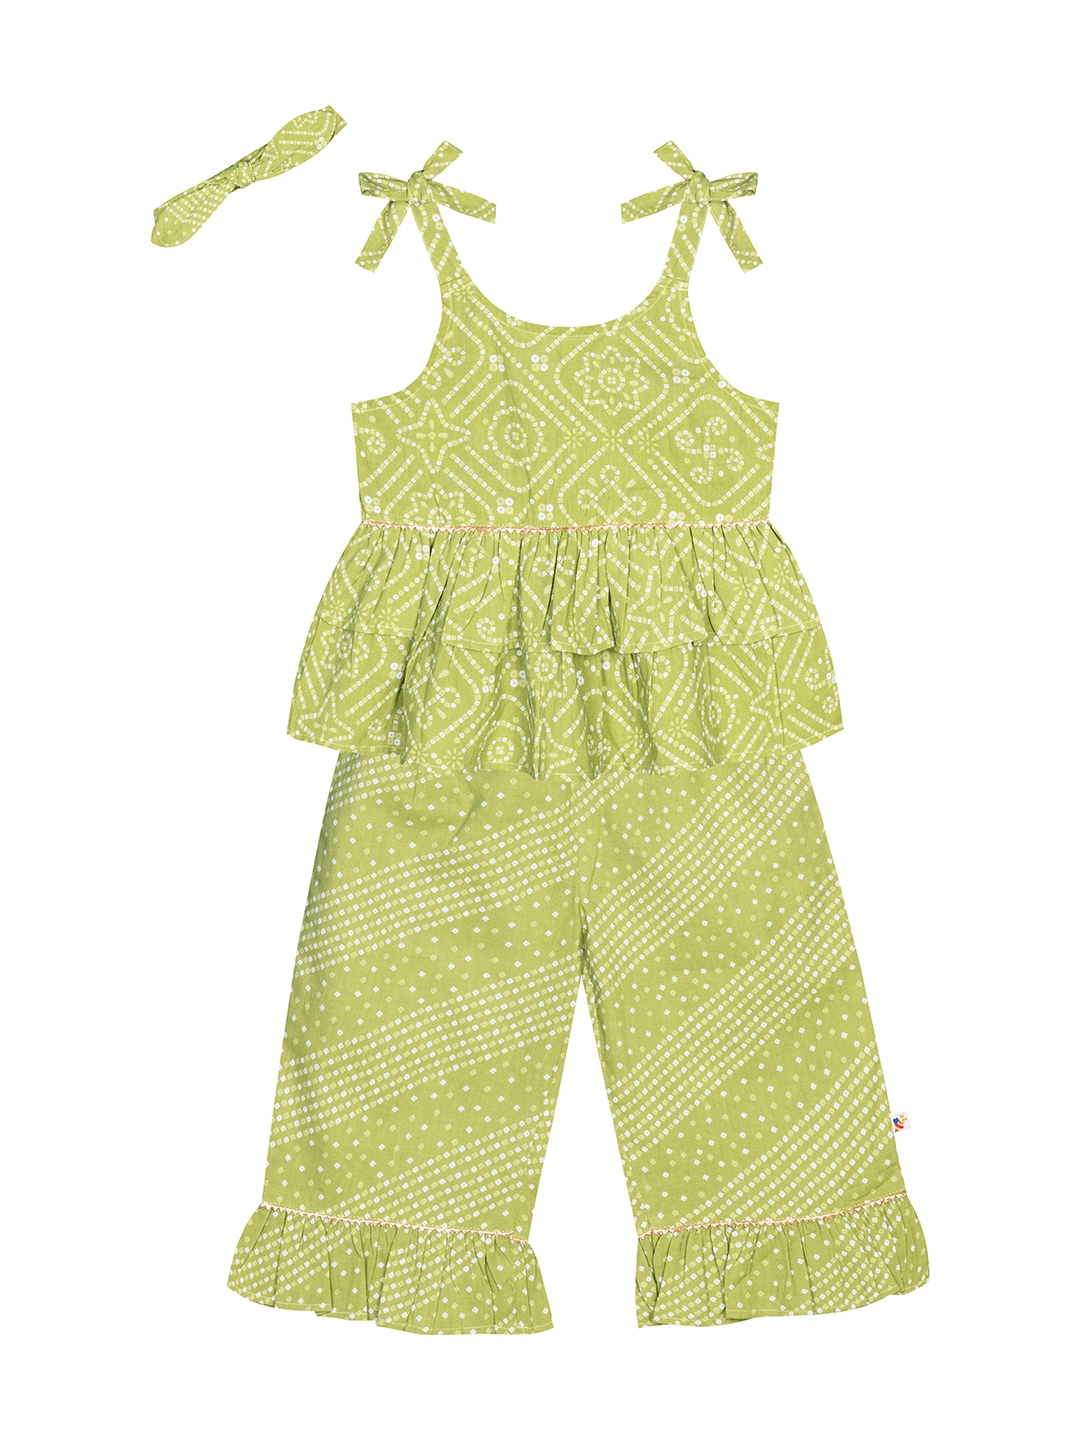 Budding Bees Infants Cotton Top-Pajama Set with Matching Hairband-Green